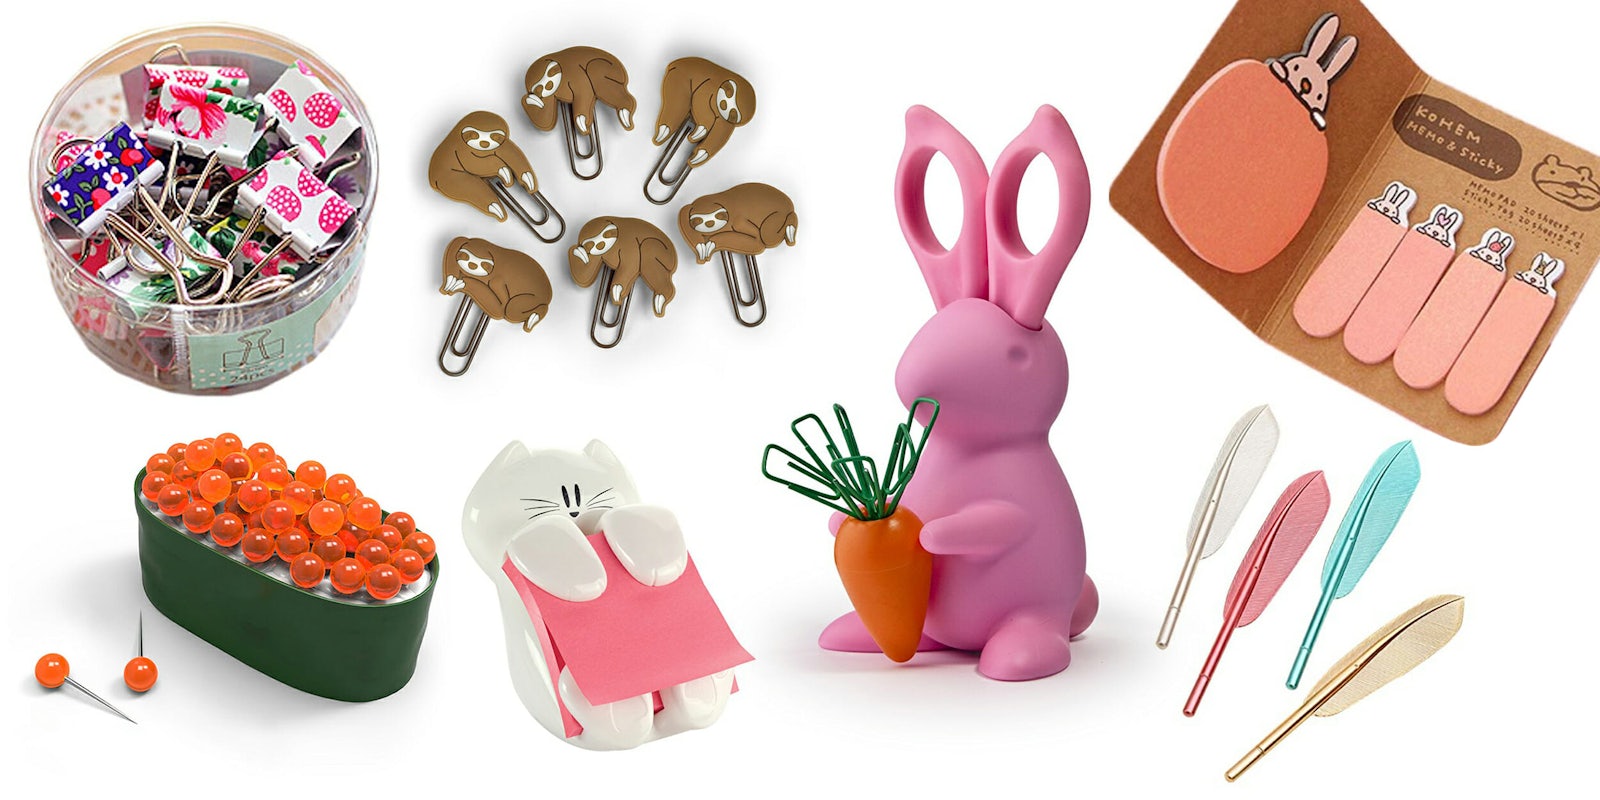 Sushi egg pushpins, cat sticky note dispenser, rabbit holding carrot paperclips, feather pens, sloth paperclips, and rabbit sticky notes.